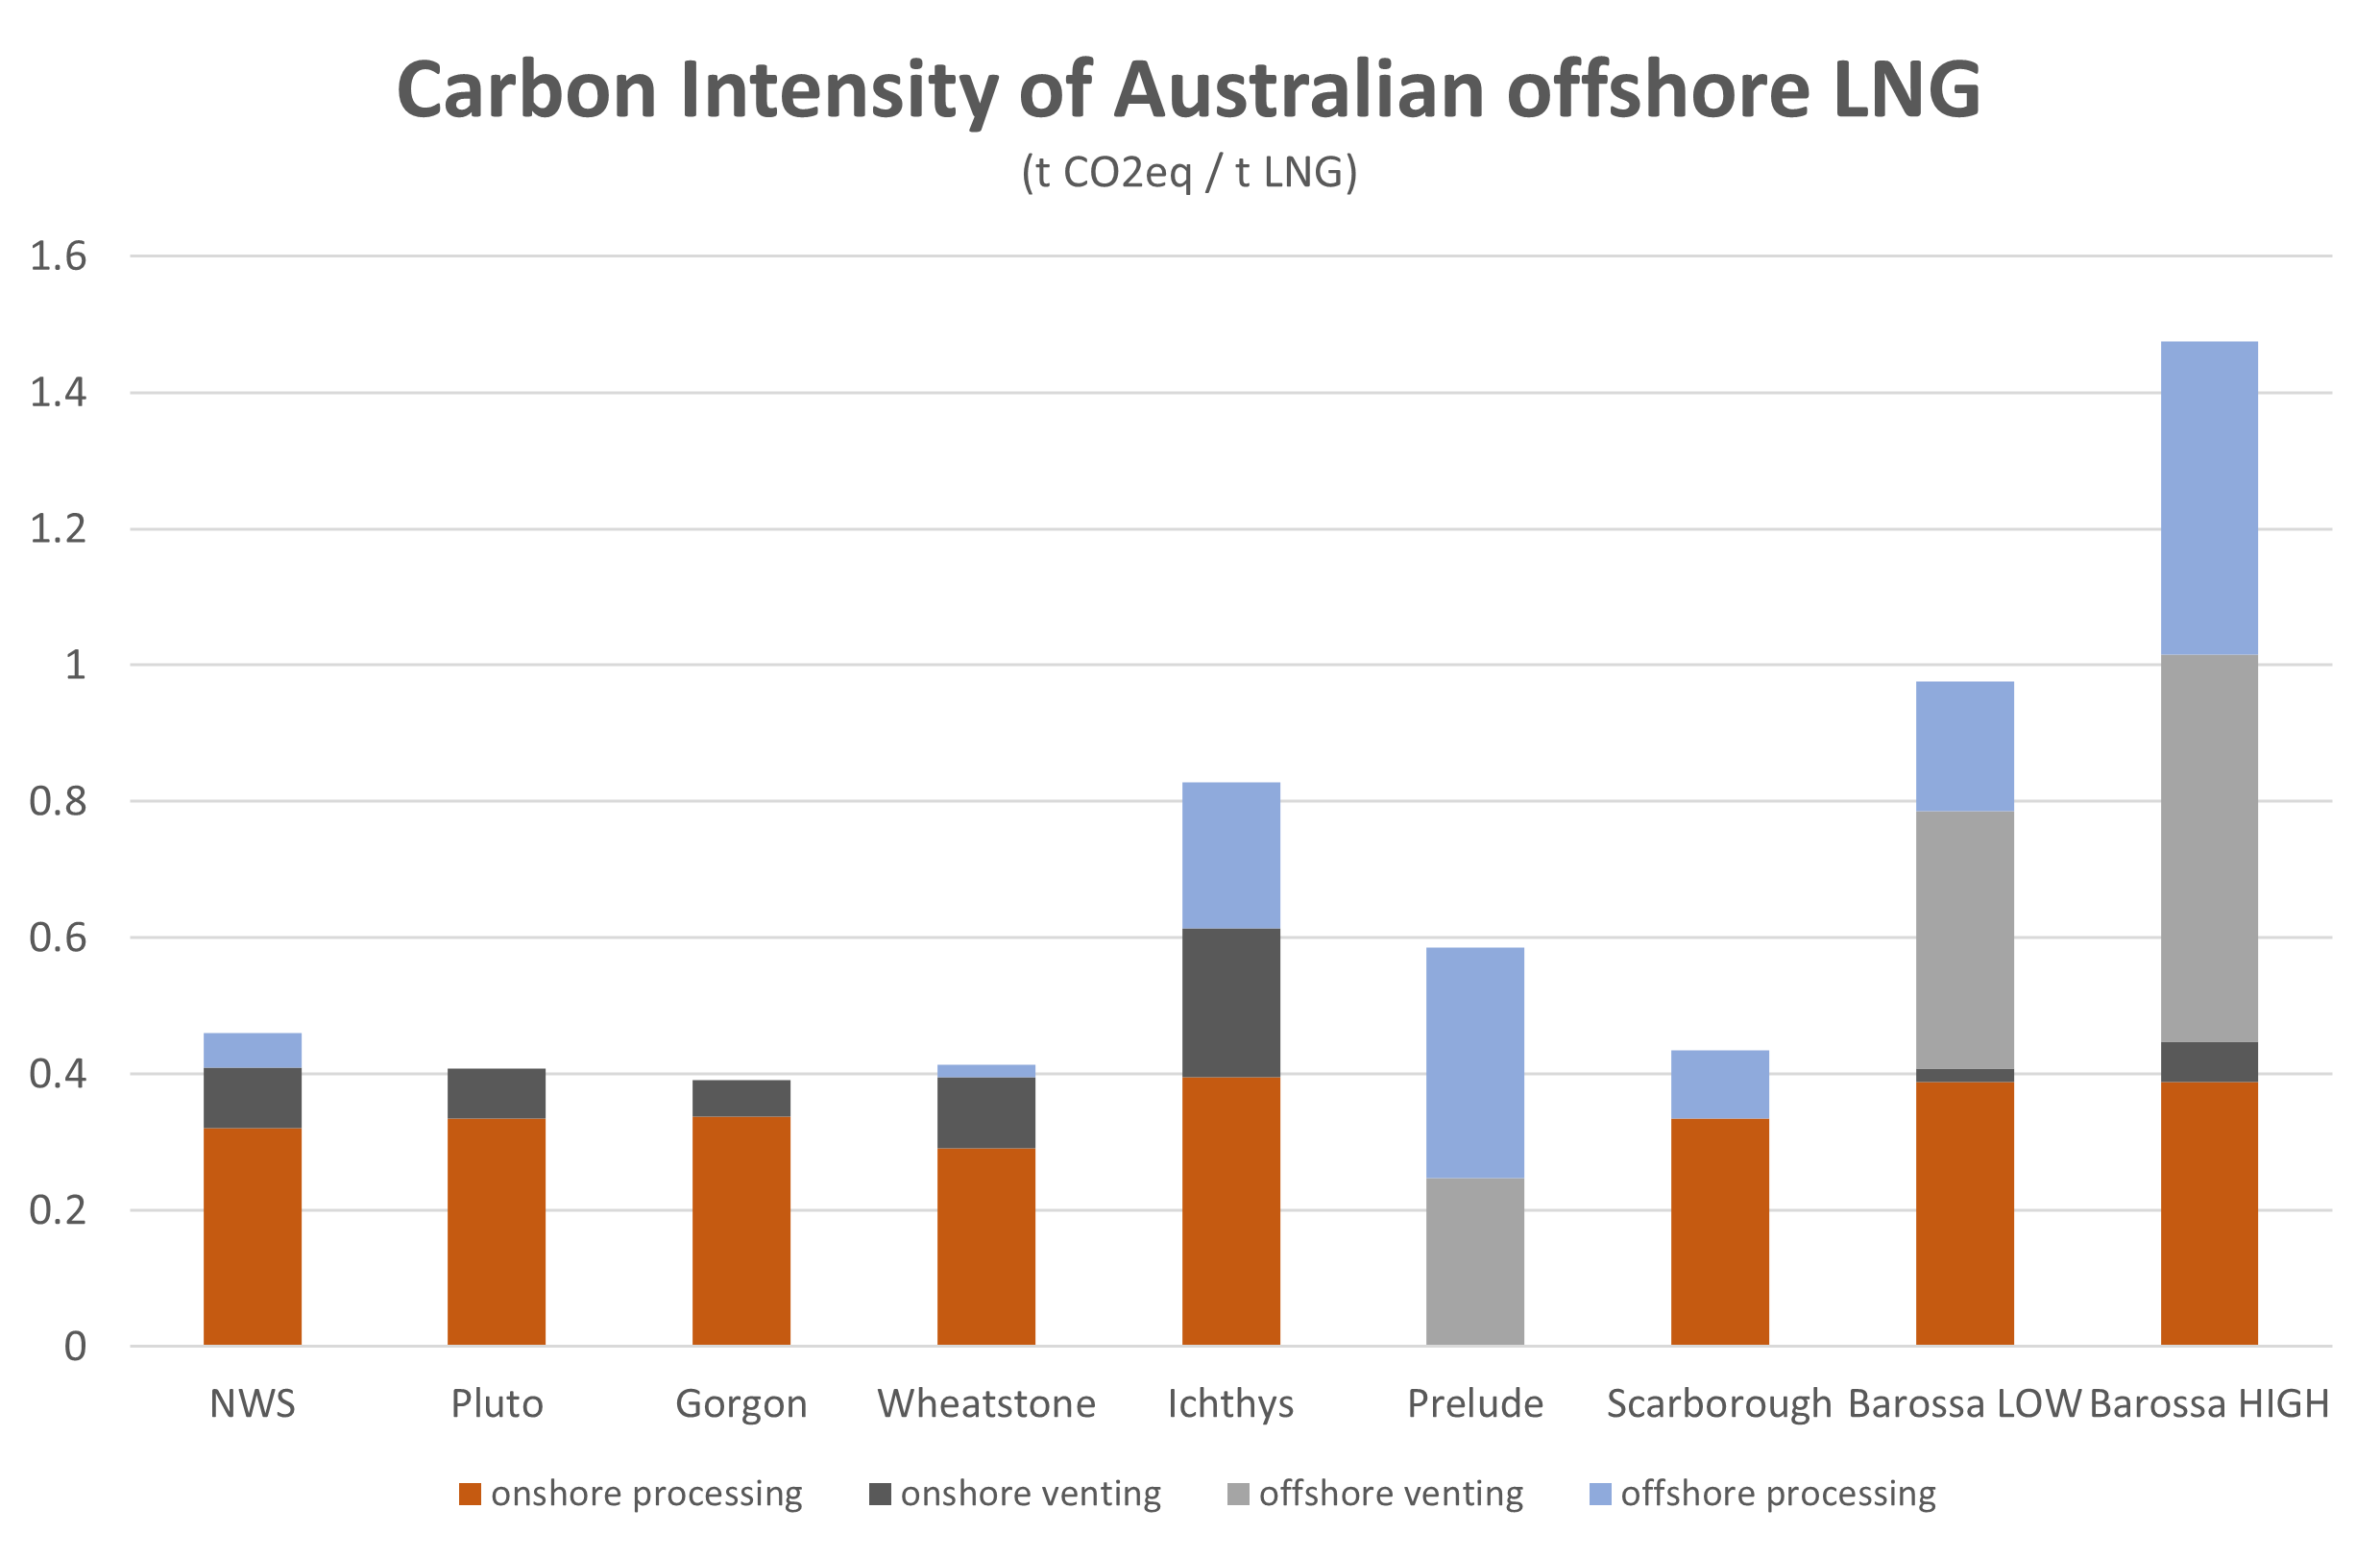 Carbon Intensity of Australian Offshore LNG projects NWS Pluto Gorgon Wheatstone Ichthys Prelude Scarborough Barossa